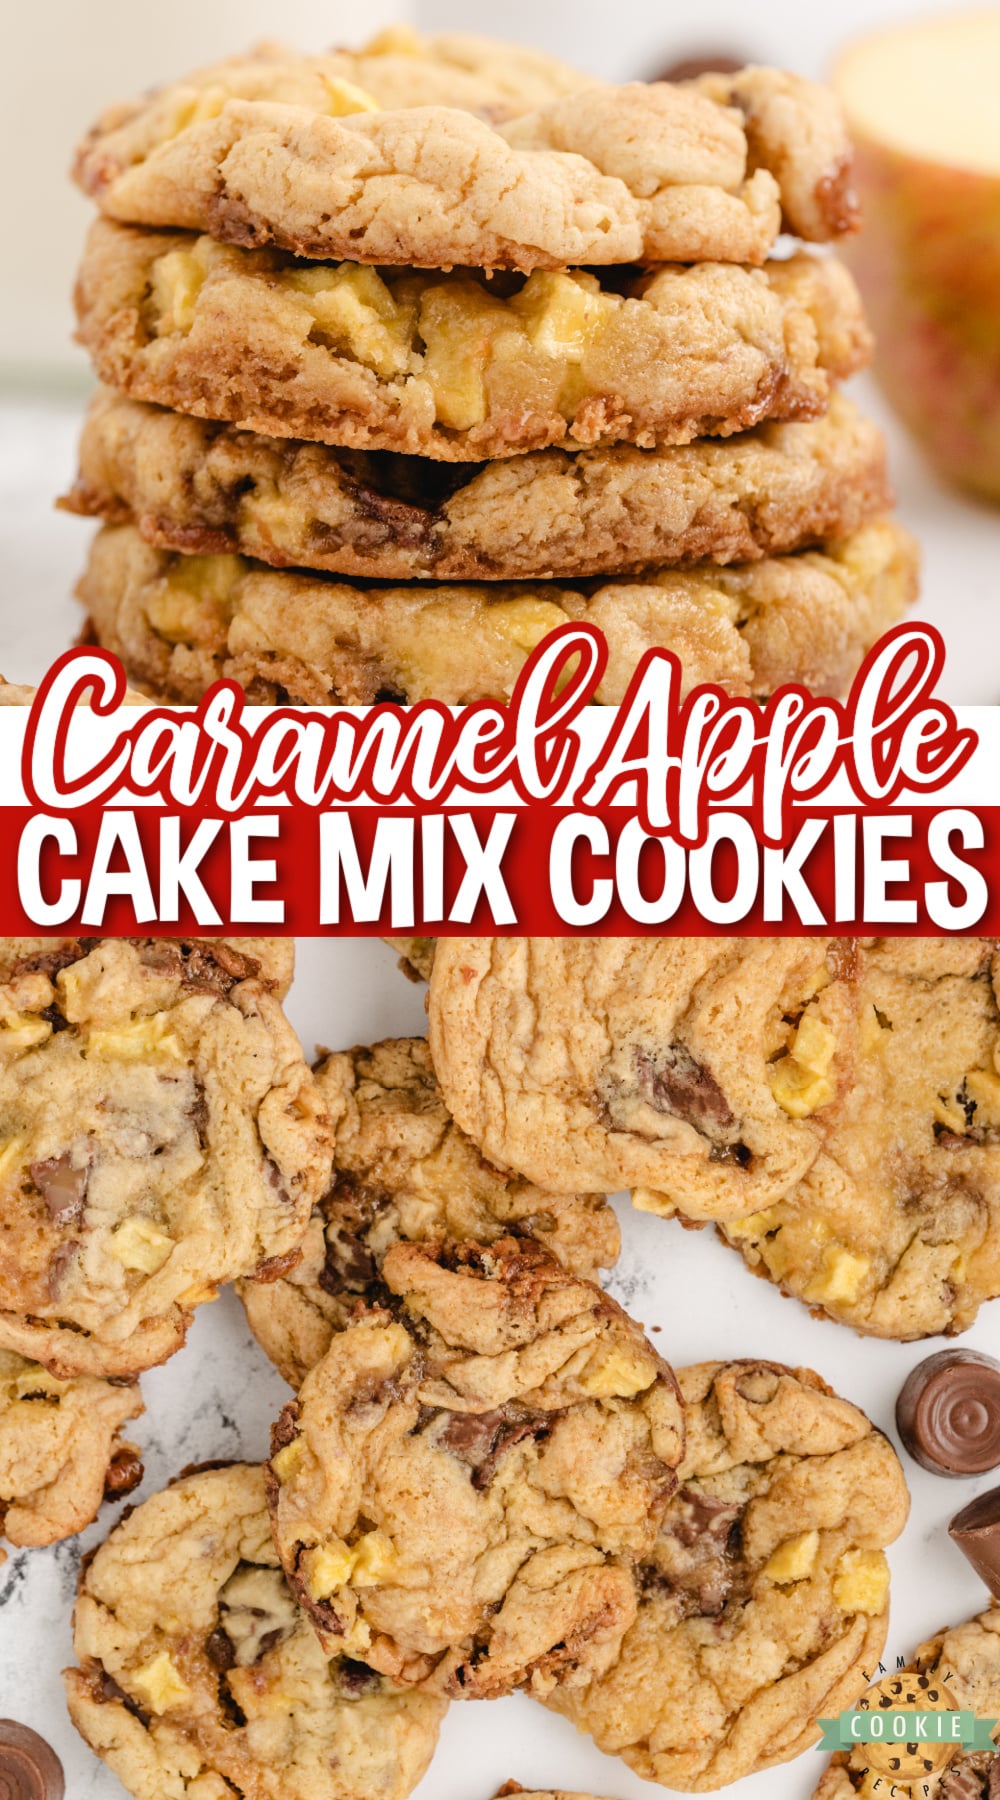 Caramel Apple Cake Mix Cookies are easily made with a cake mix, chopped apples and Rolo candies. Cake mix cookies are so simple to make and these ones taste like caramel apples!